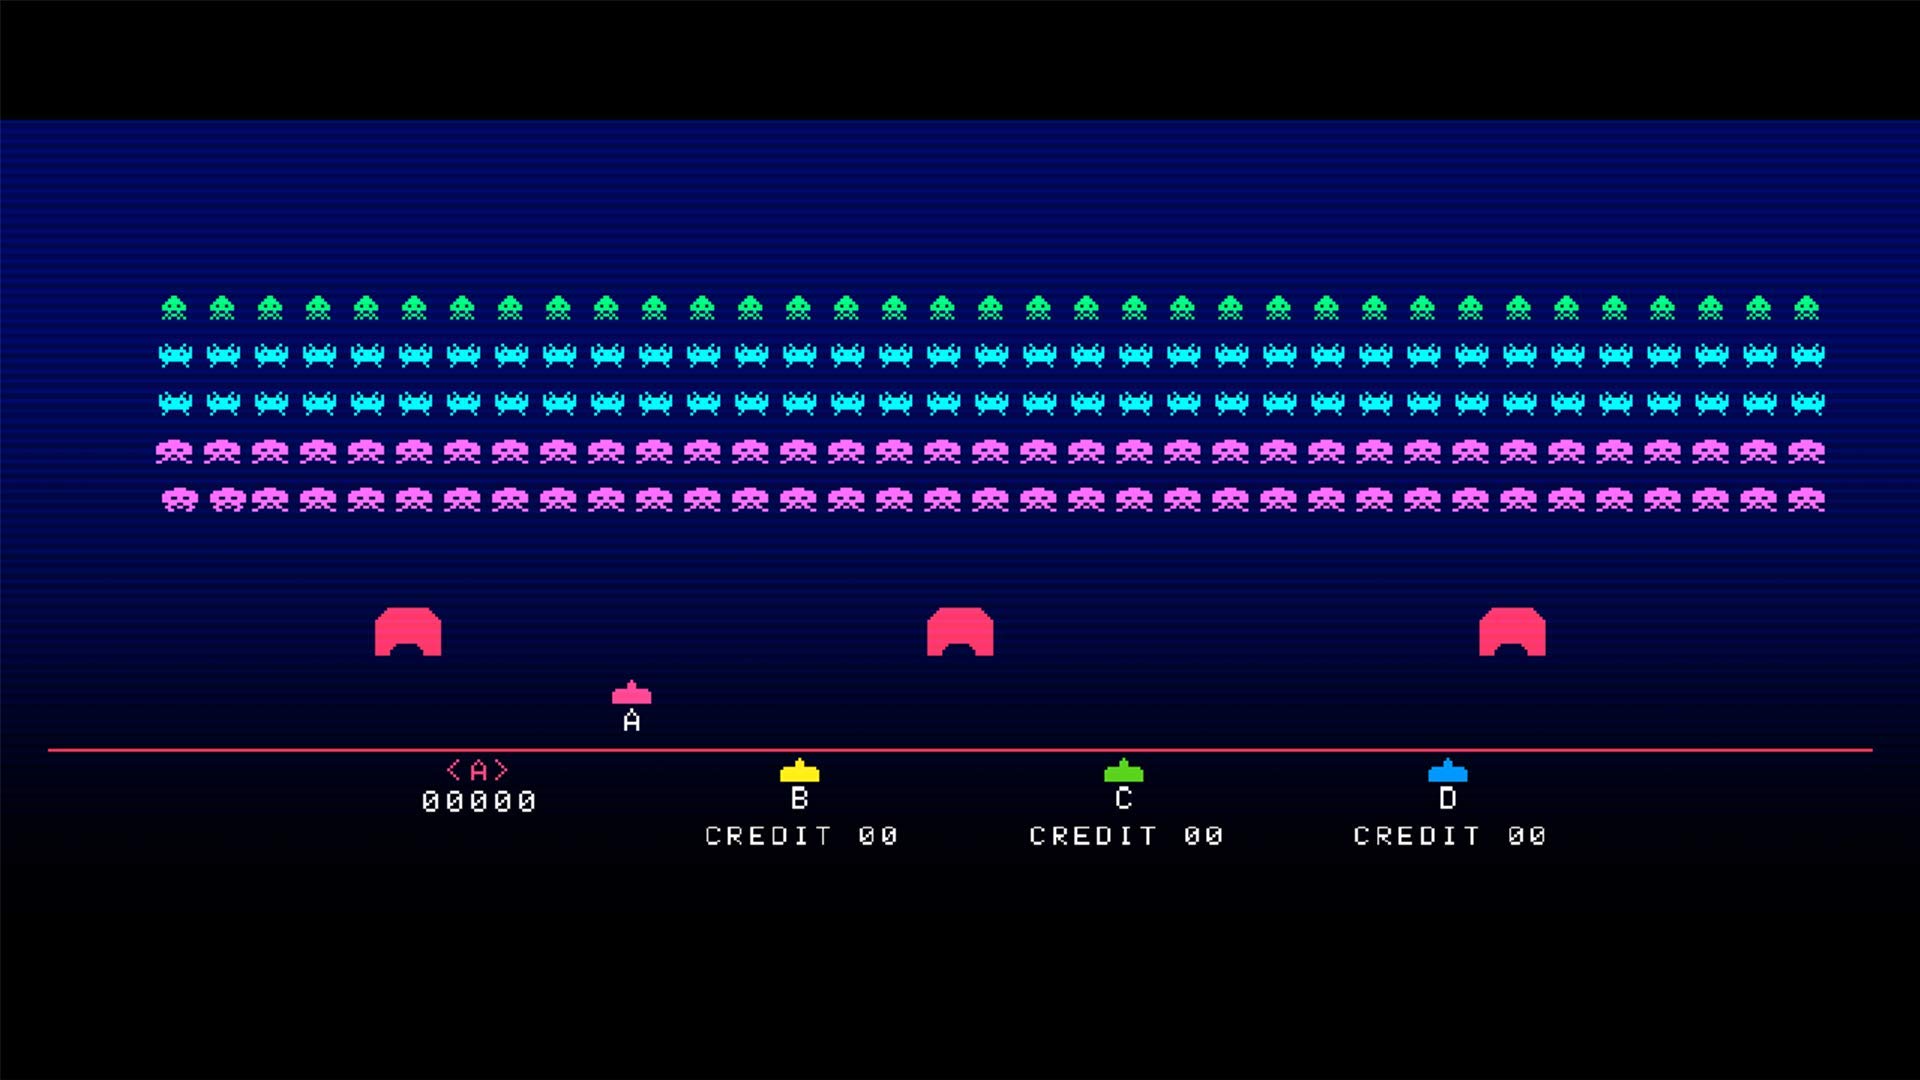 Space Invaders Forever - Nintendo Switch Edition